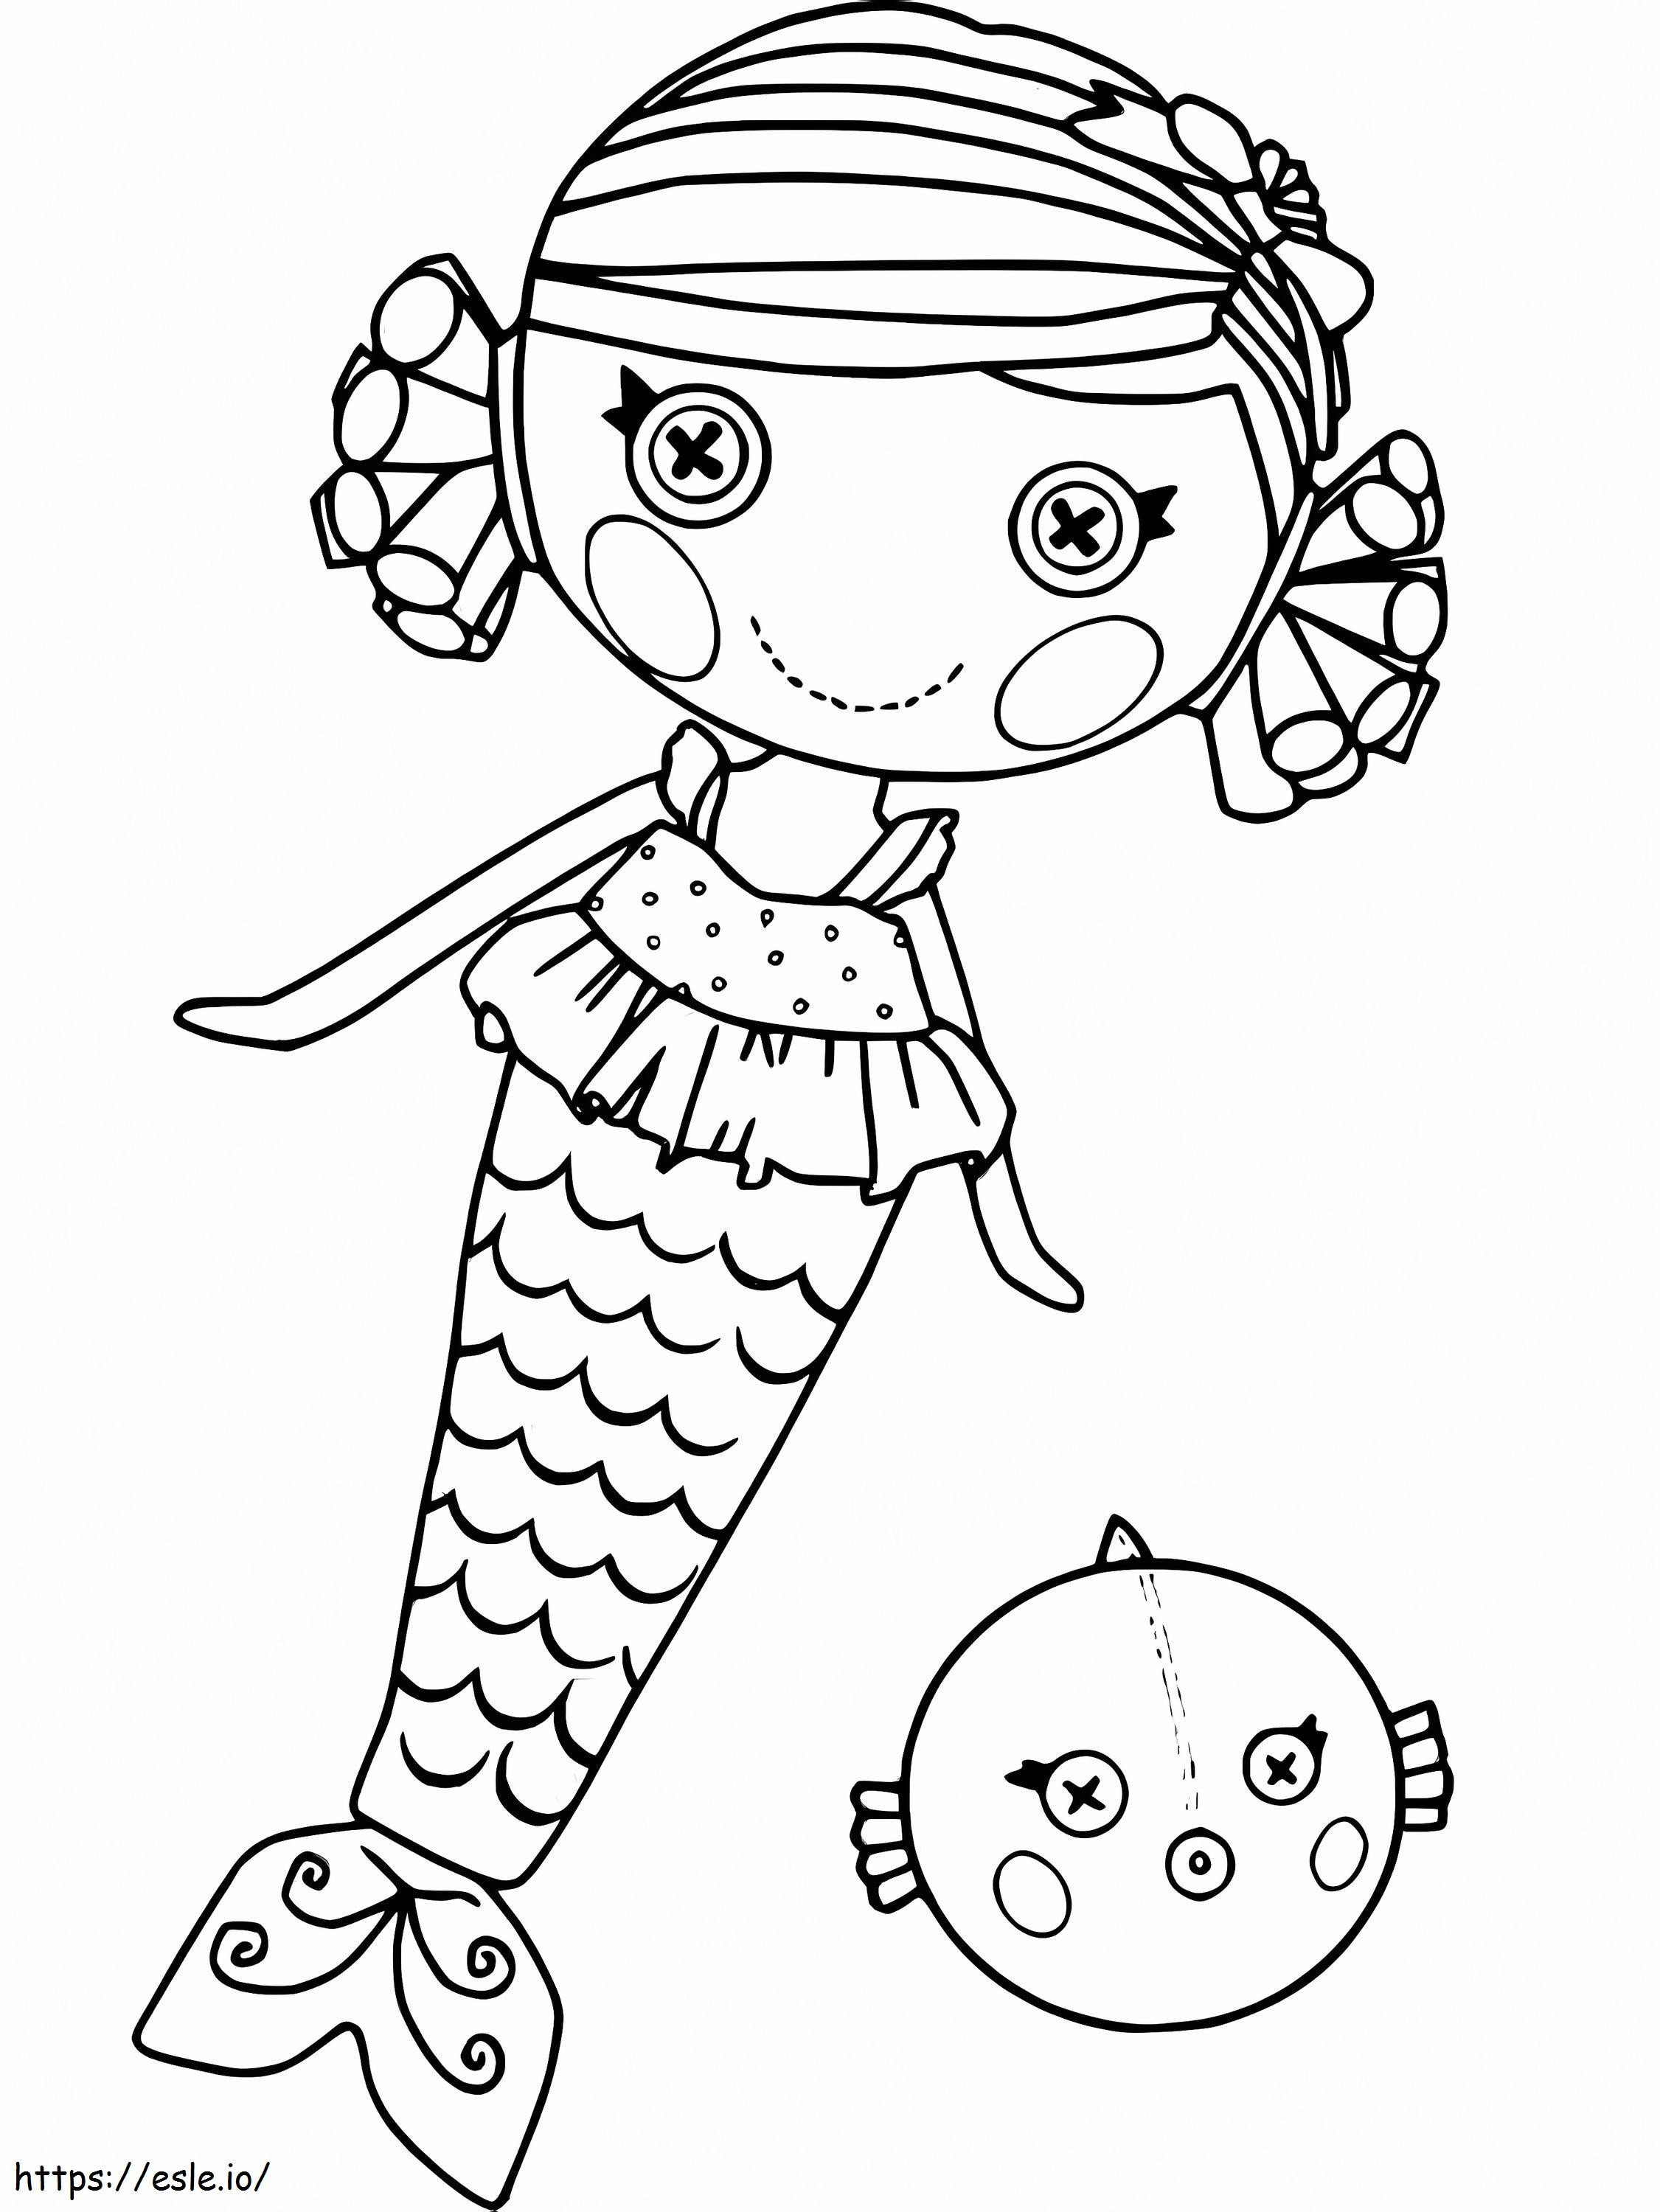 Lalaloopsy The Mermaid And The Puffer Fish coloring page